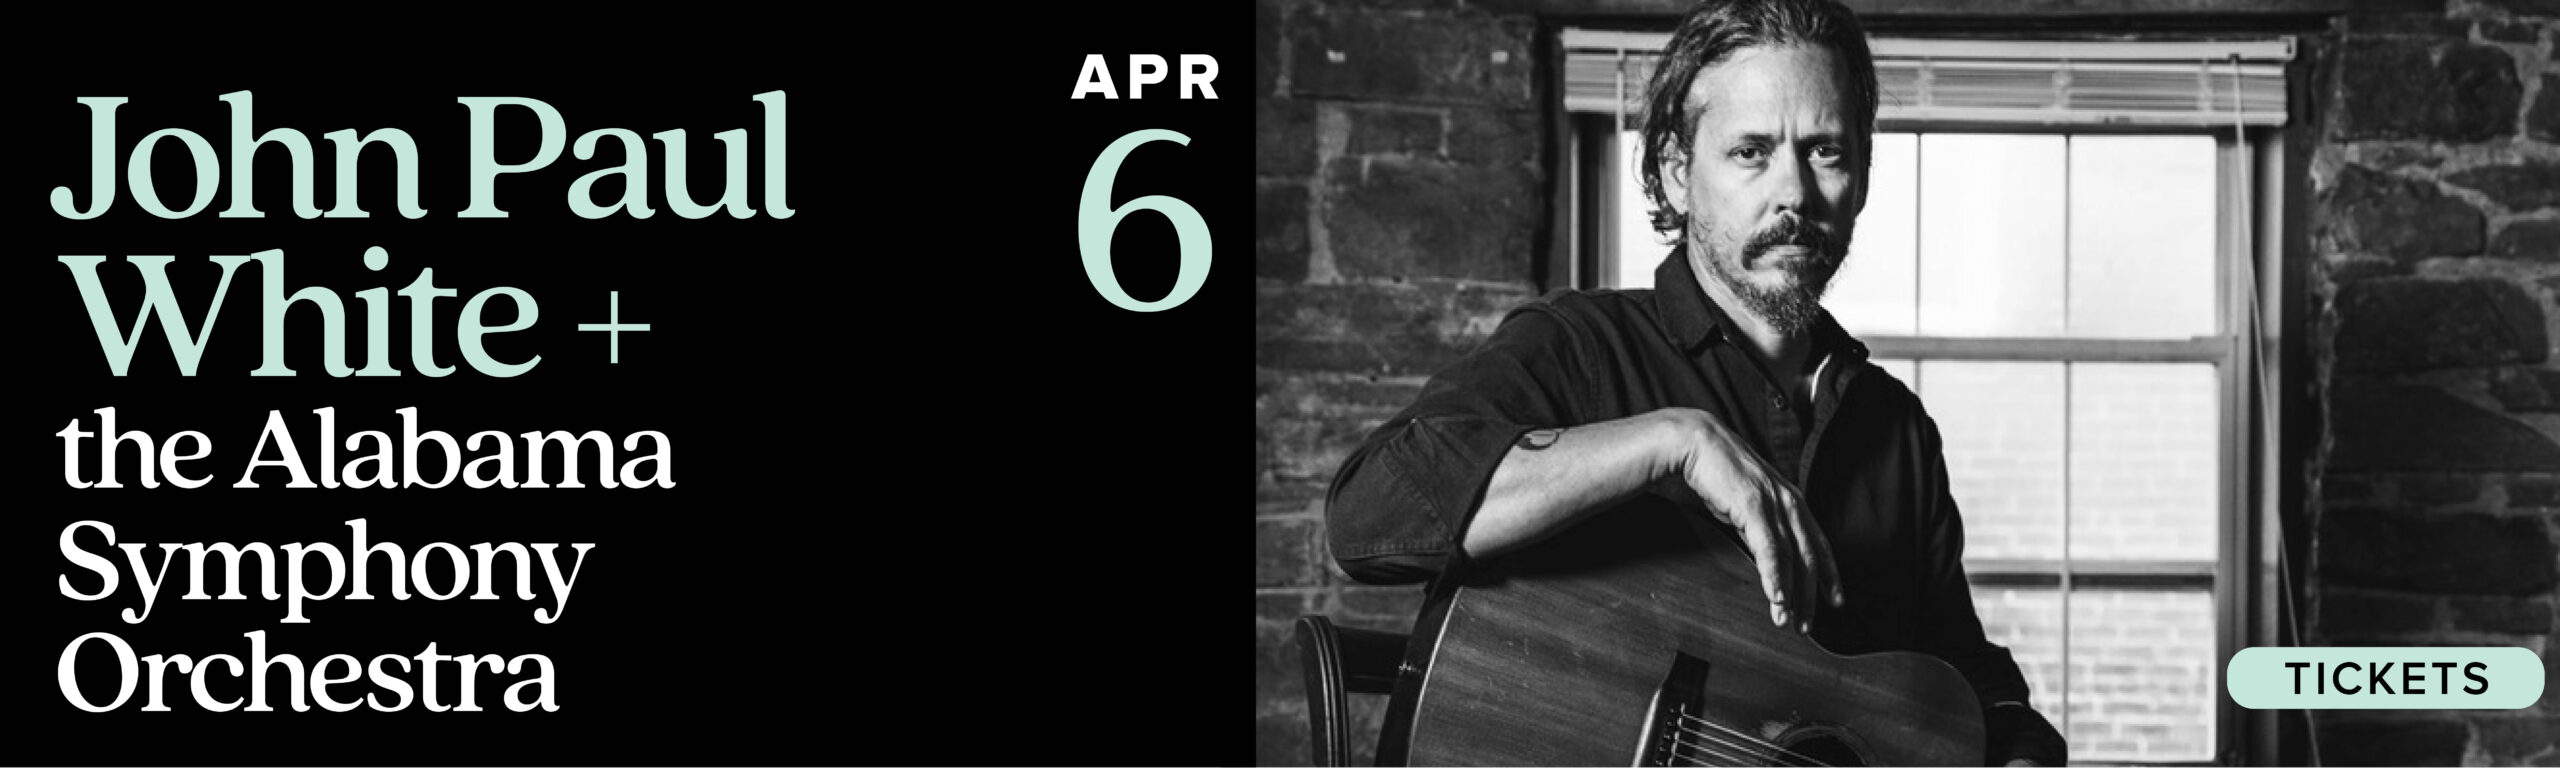 Purchase your tickets for John Paul White + Alabama Symphony Orchestra, April 6